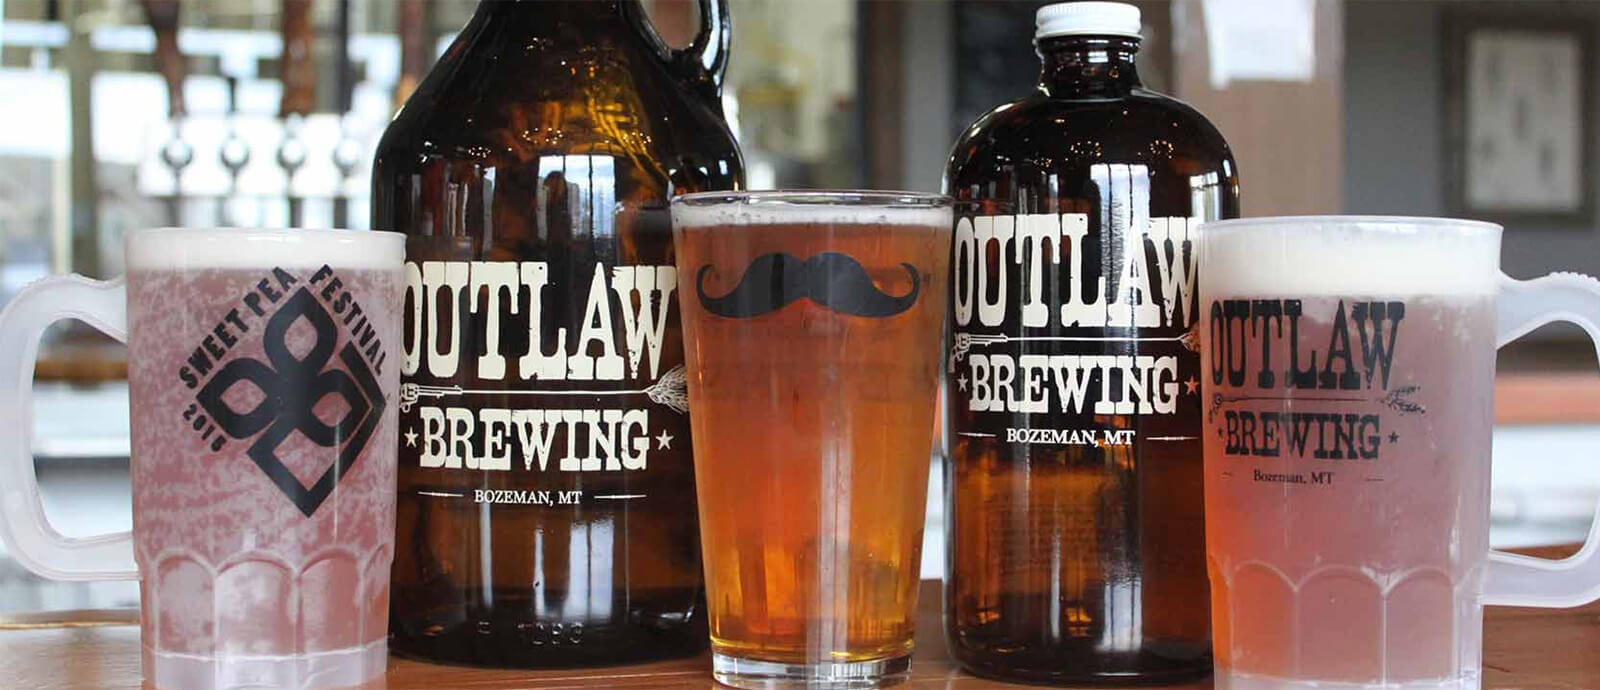 Two dark brown glass jugs with outlaw brewing logos stand between three frosted glasses of beer and foam